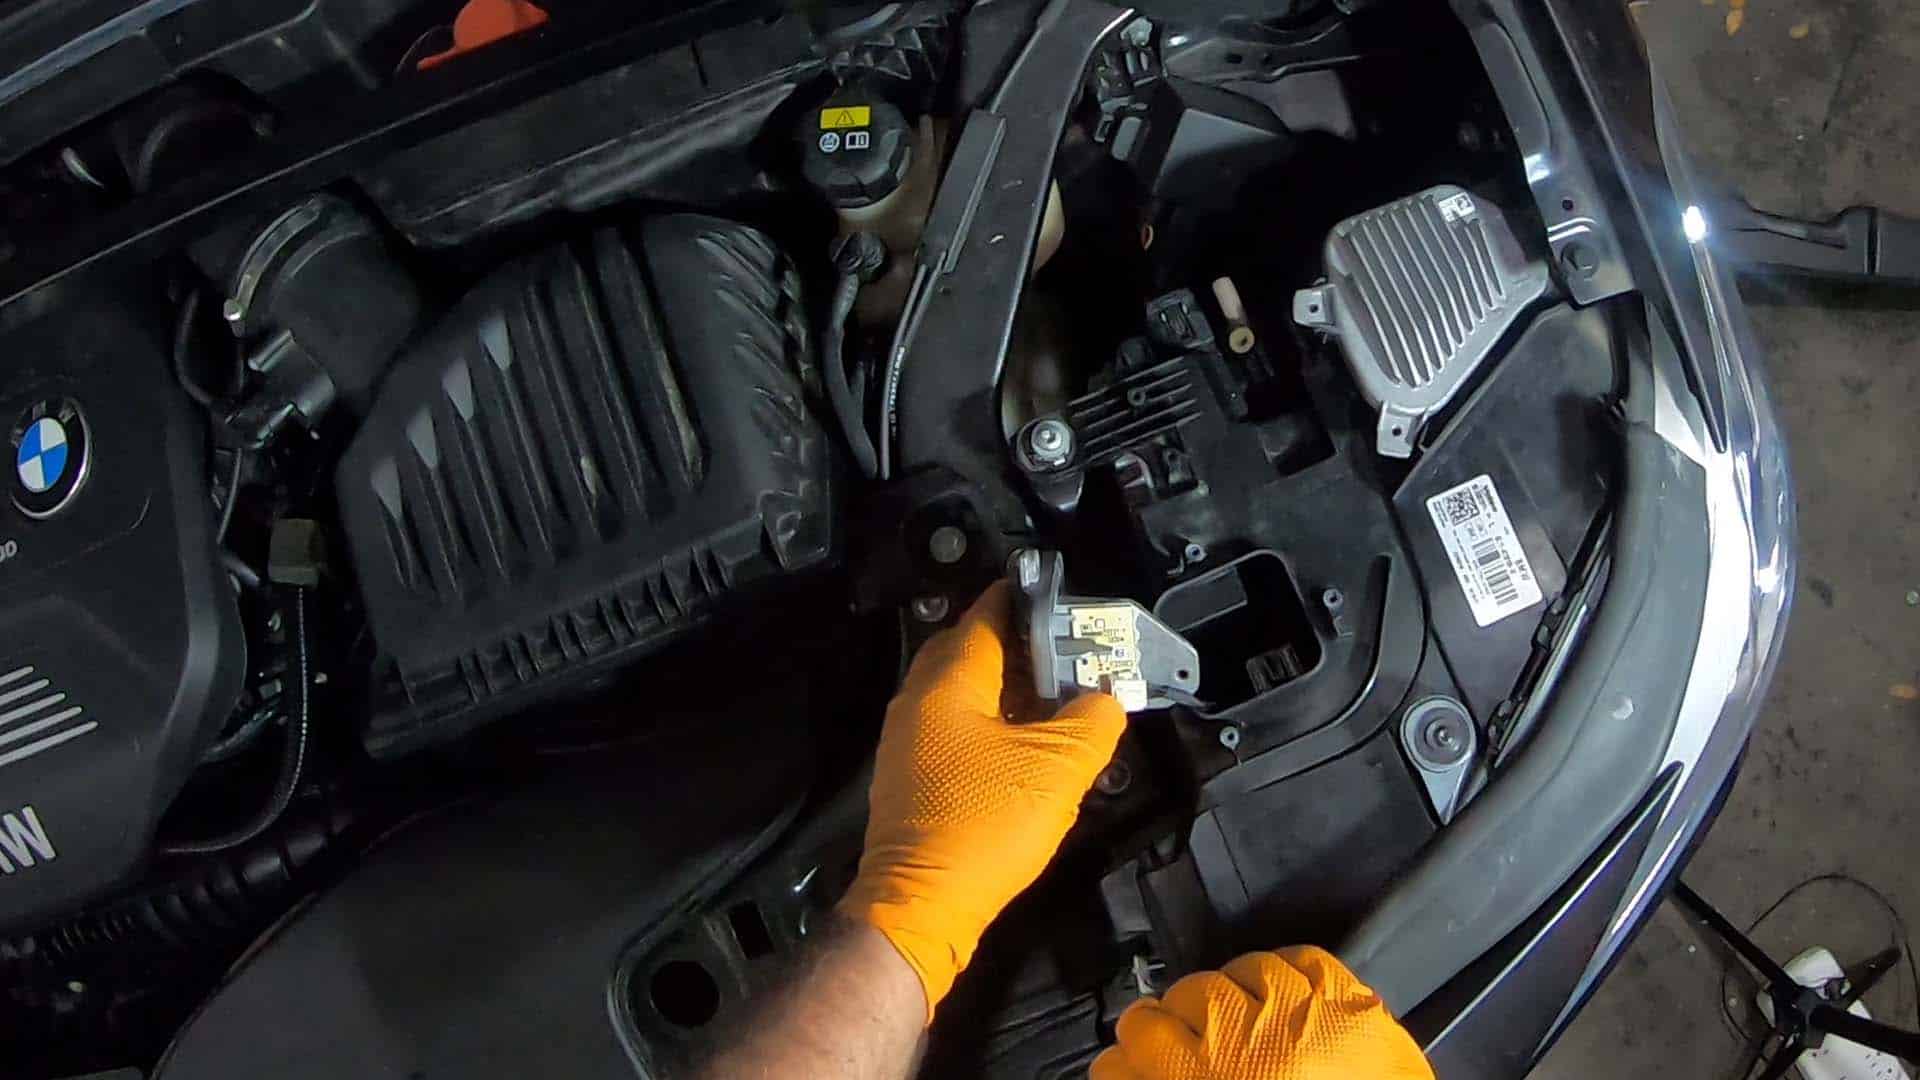 Remove the inner LED module from the headlight assembly